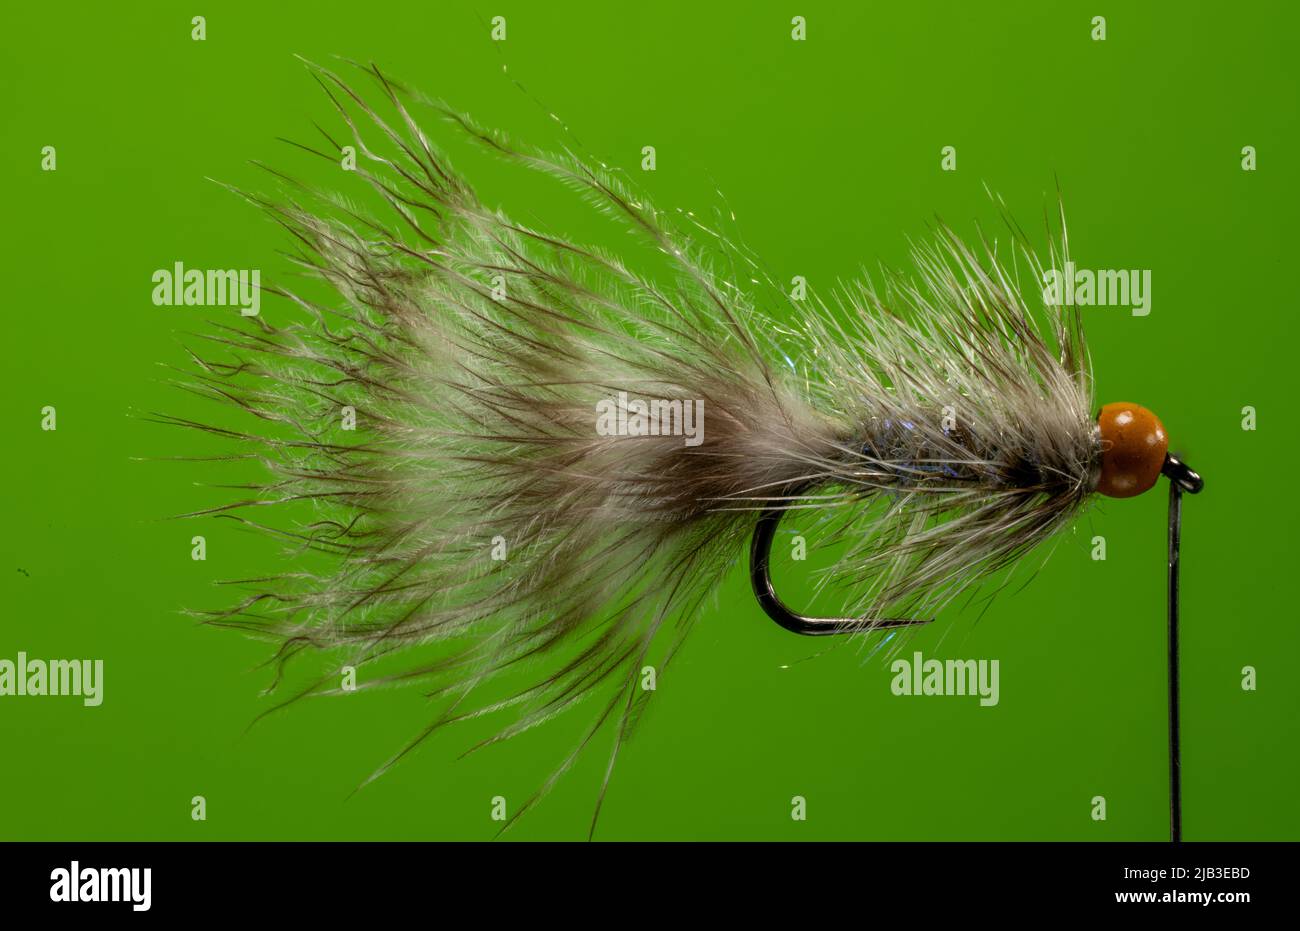 Fly for trout fishing, prepared for catching fish with barbless